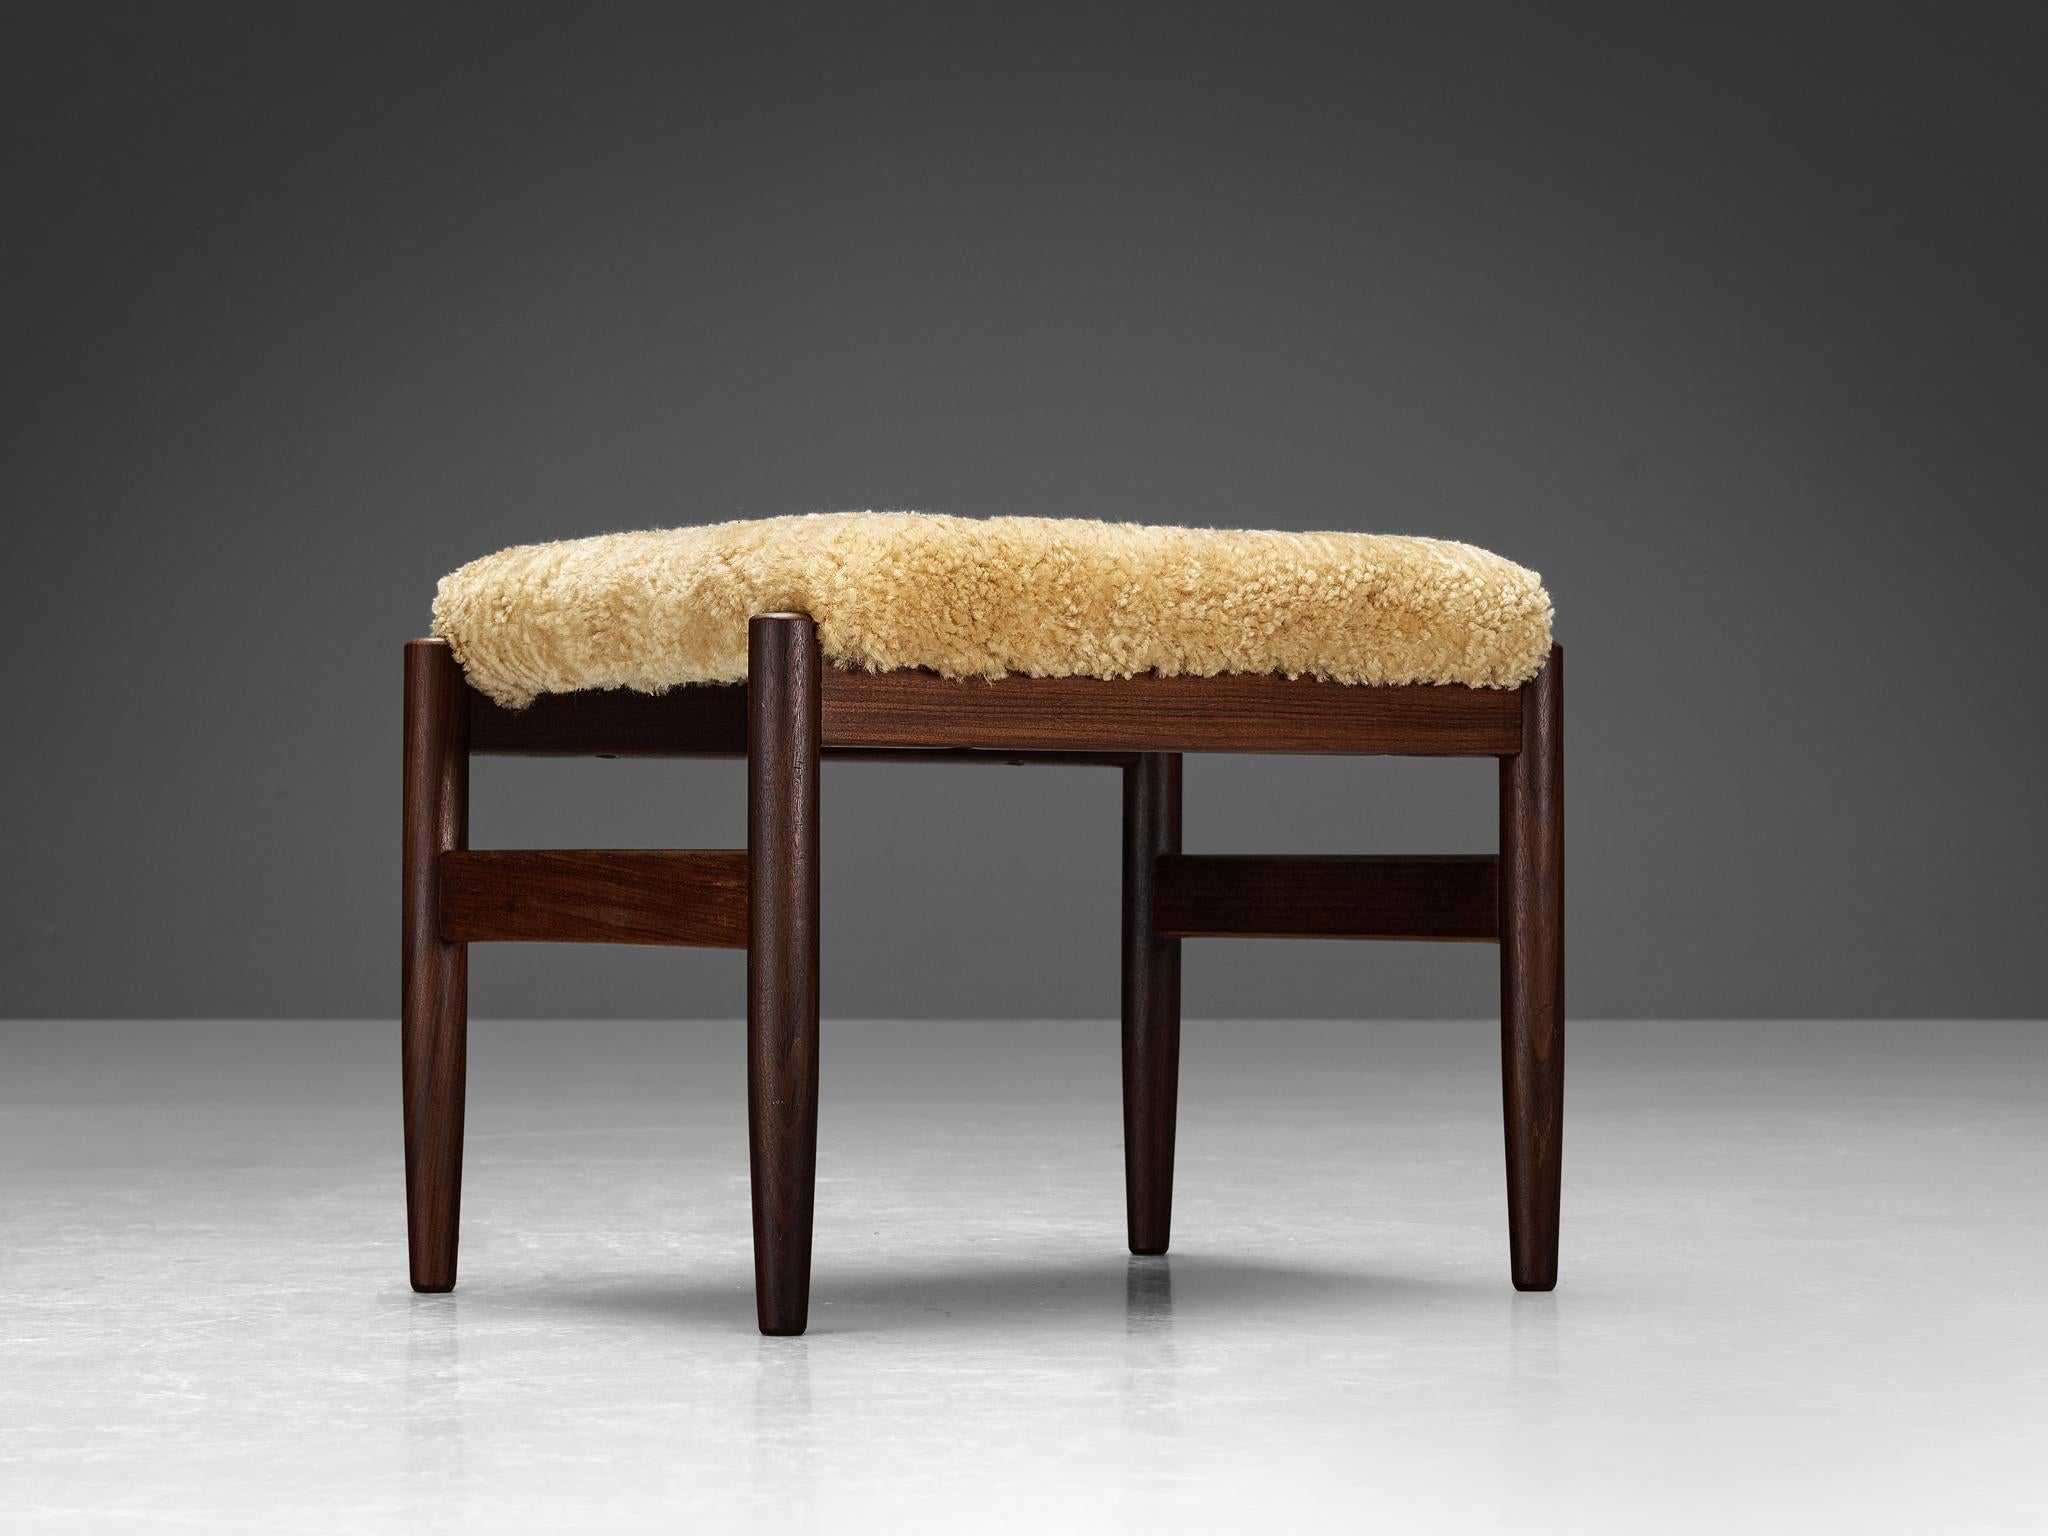 Mid-20th Century Scandinavian Stools in Teak and Shearling Upholstery  For Sale